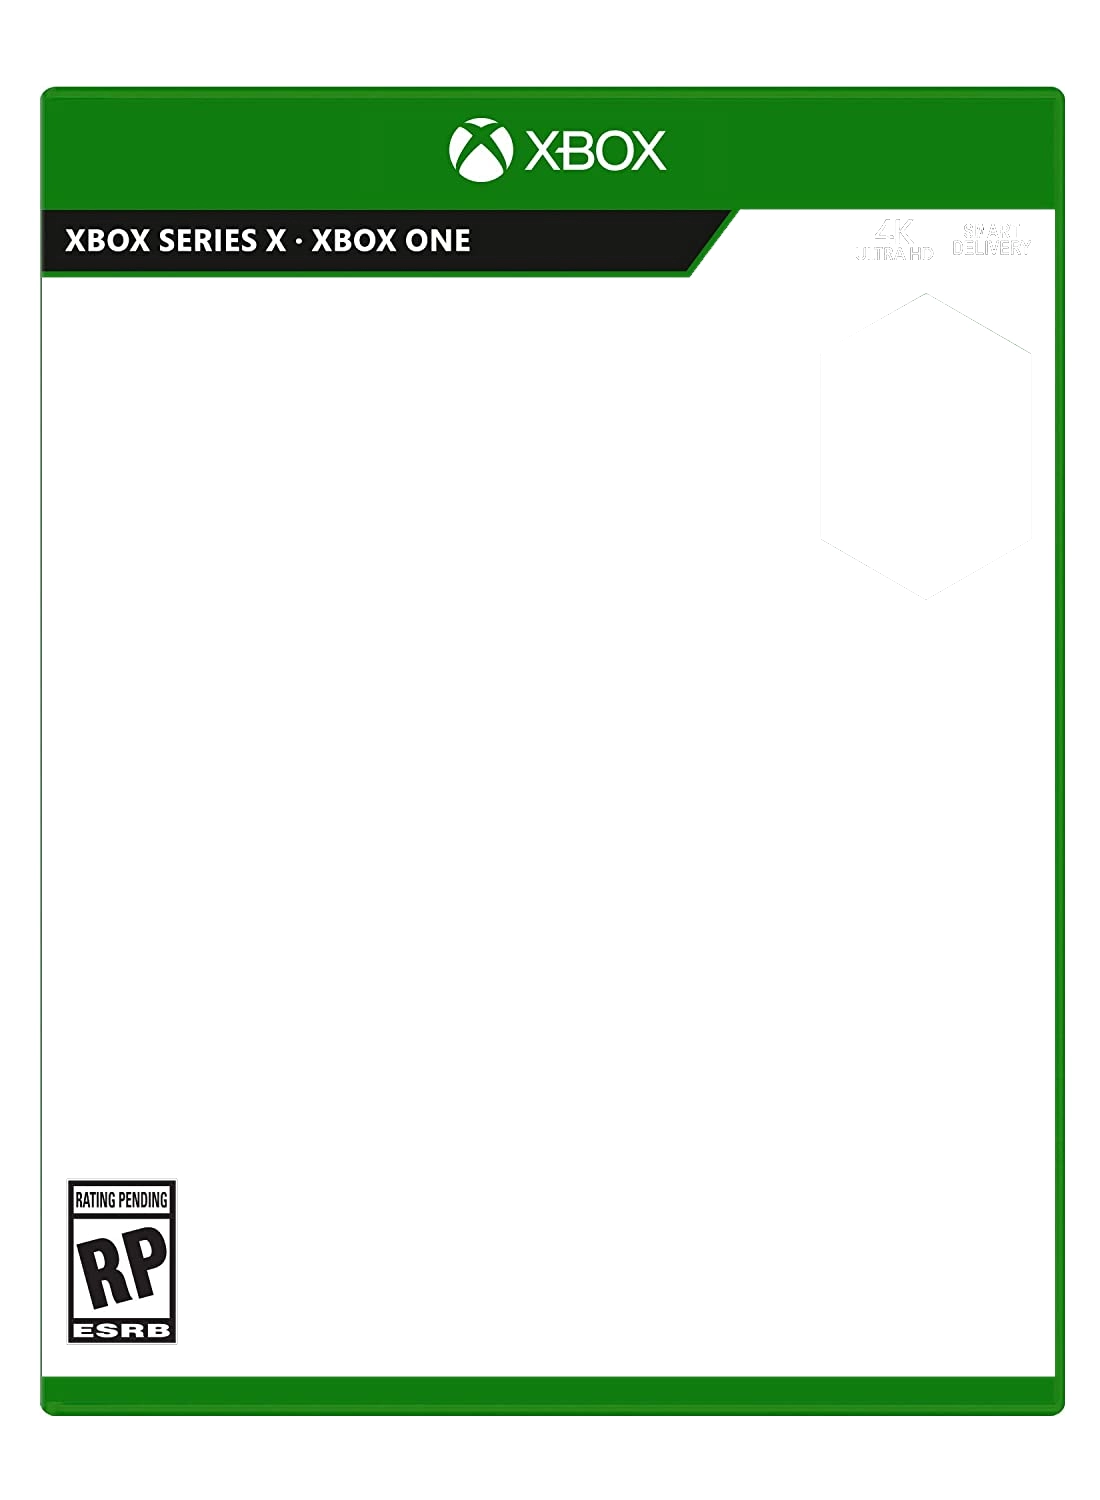 Xbox One Series X Games Category Image